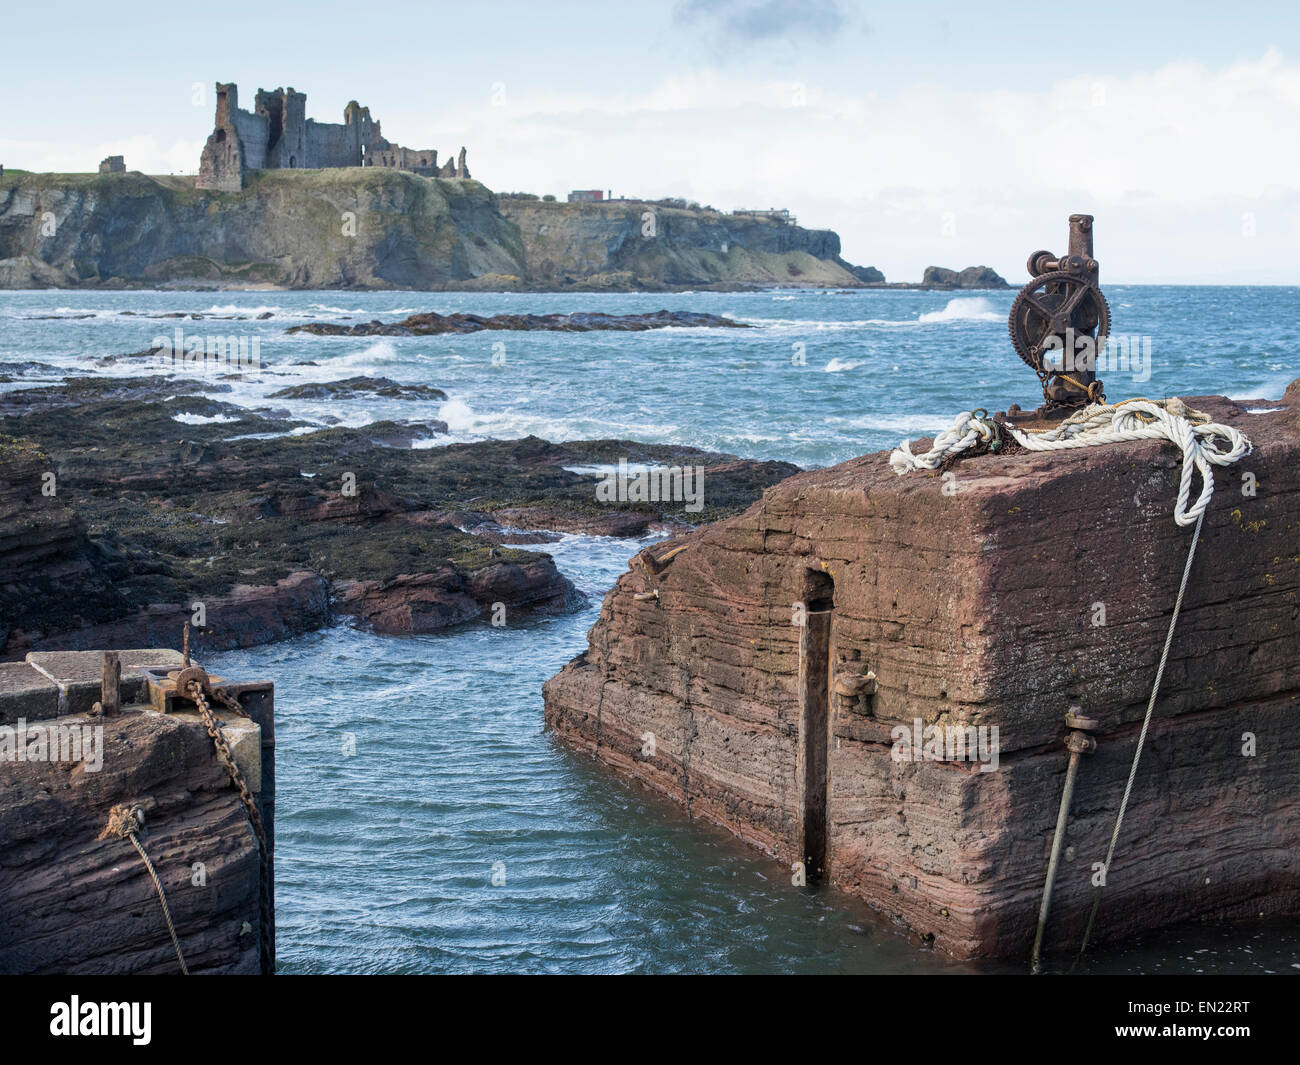 Tantallon Castle ( background ) and Seacliff harbour the smallest harbour in the UK.  North Berwick, East Lothian, Scotland. Stock Photo